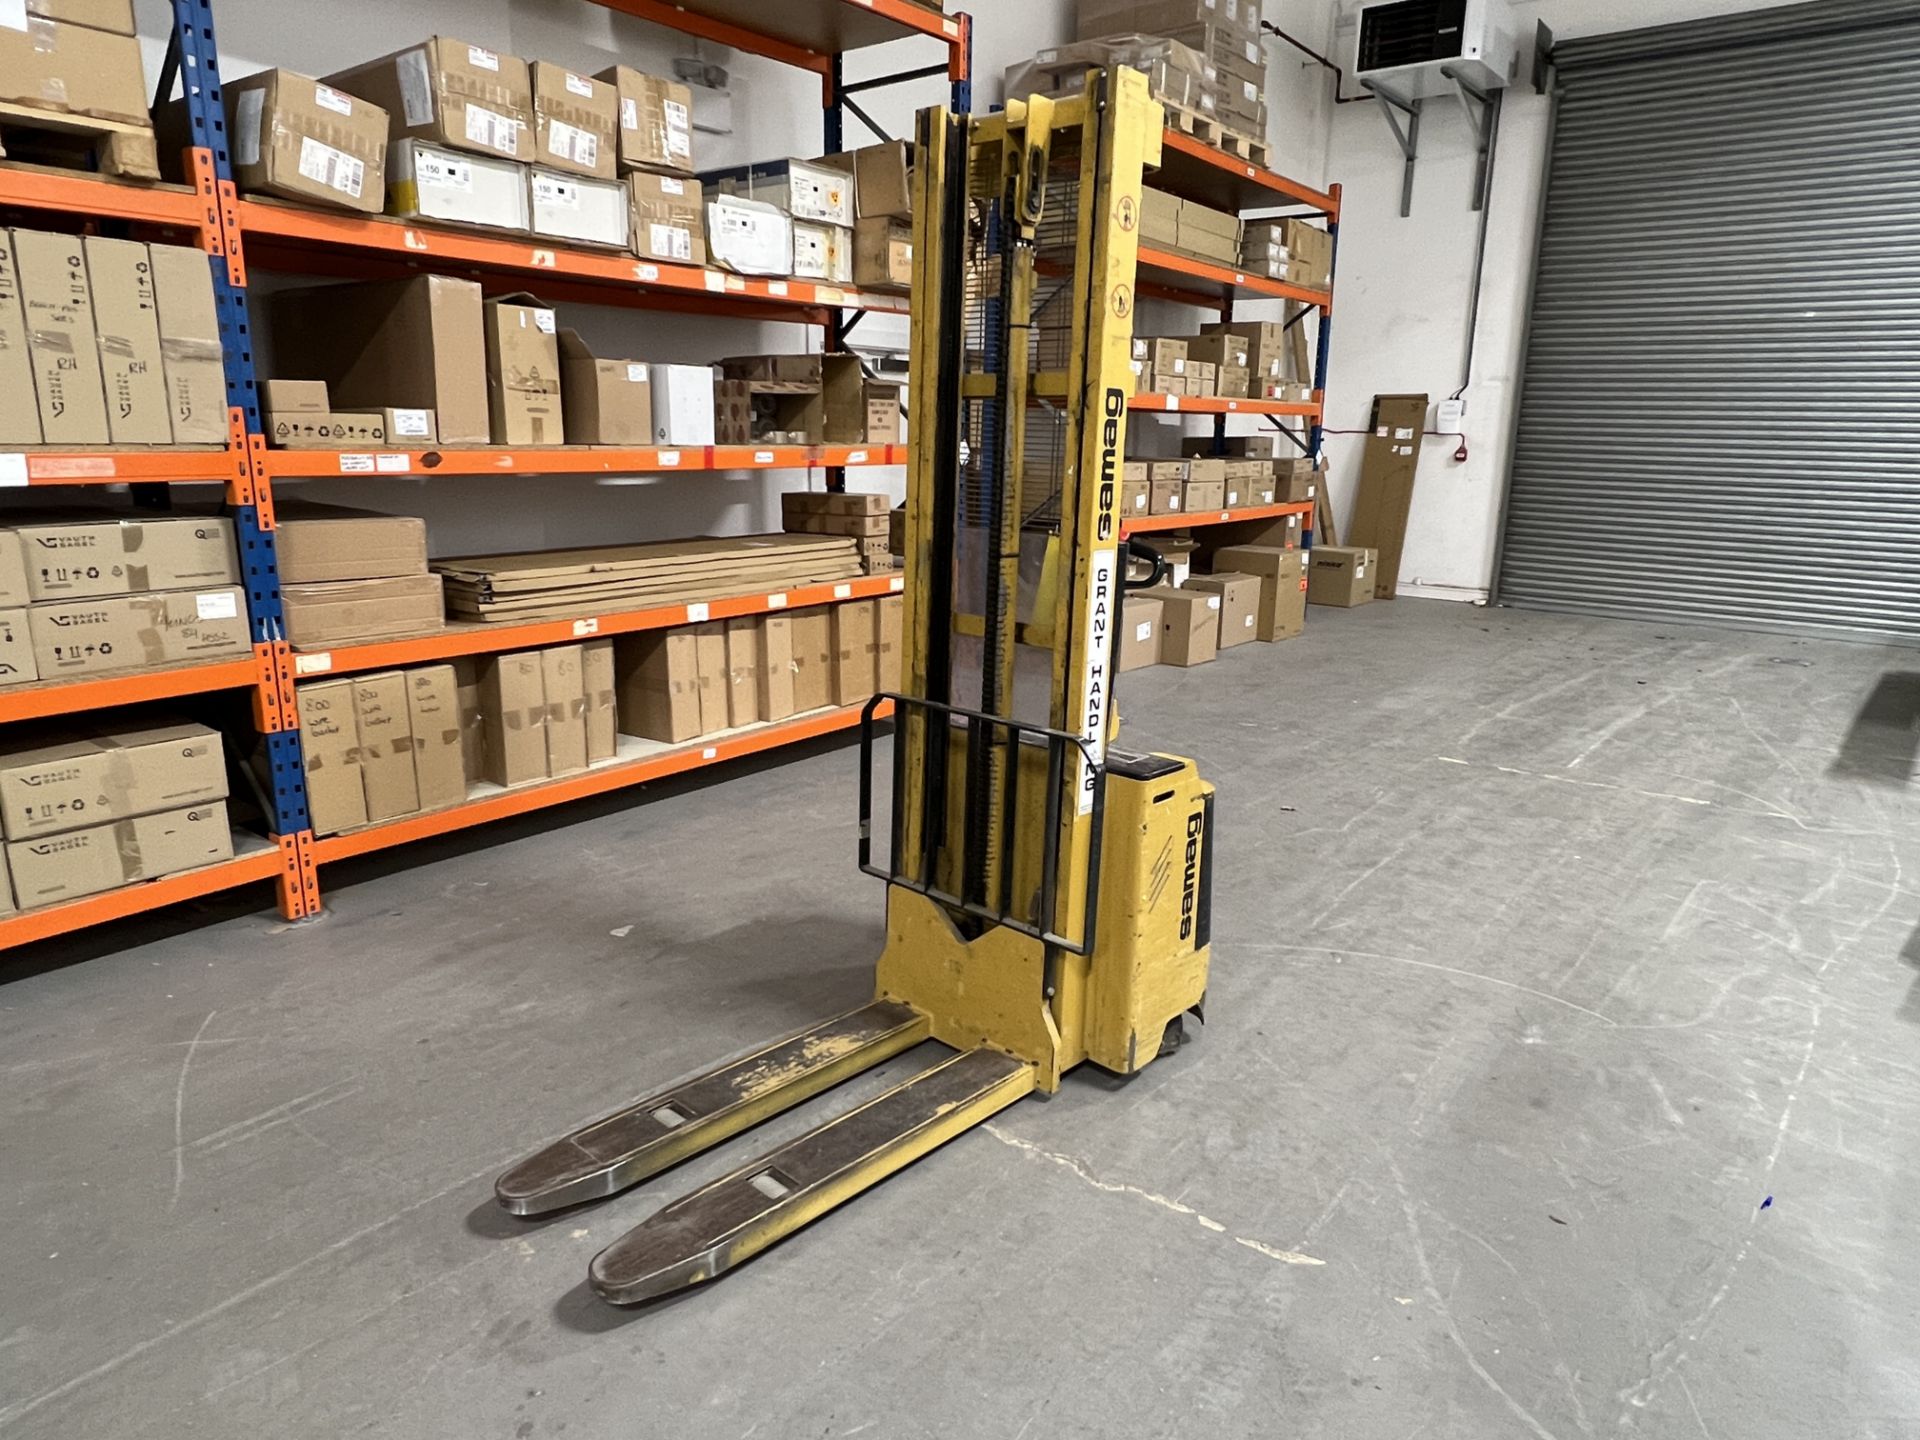 Samag Ego 10 pedestrian controlled electric pallet truck, 1,000 kg capacity, maximum lift height - Image 2 of 8